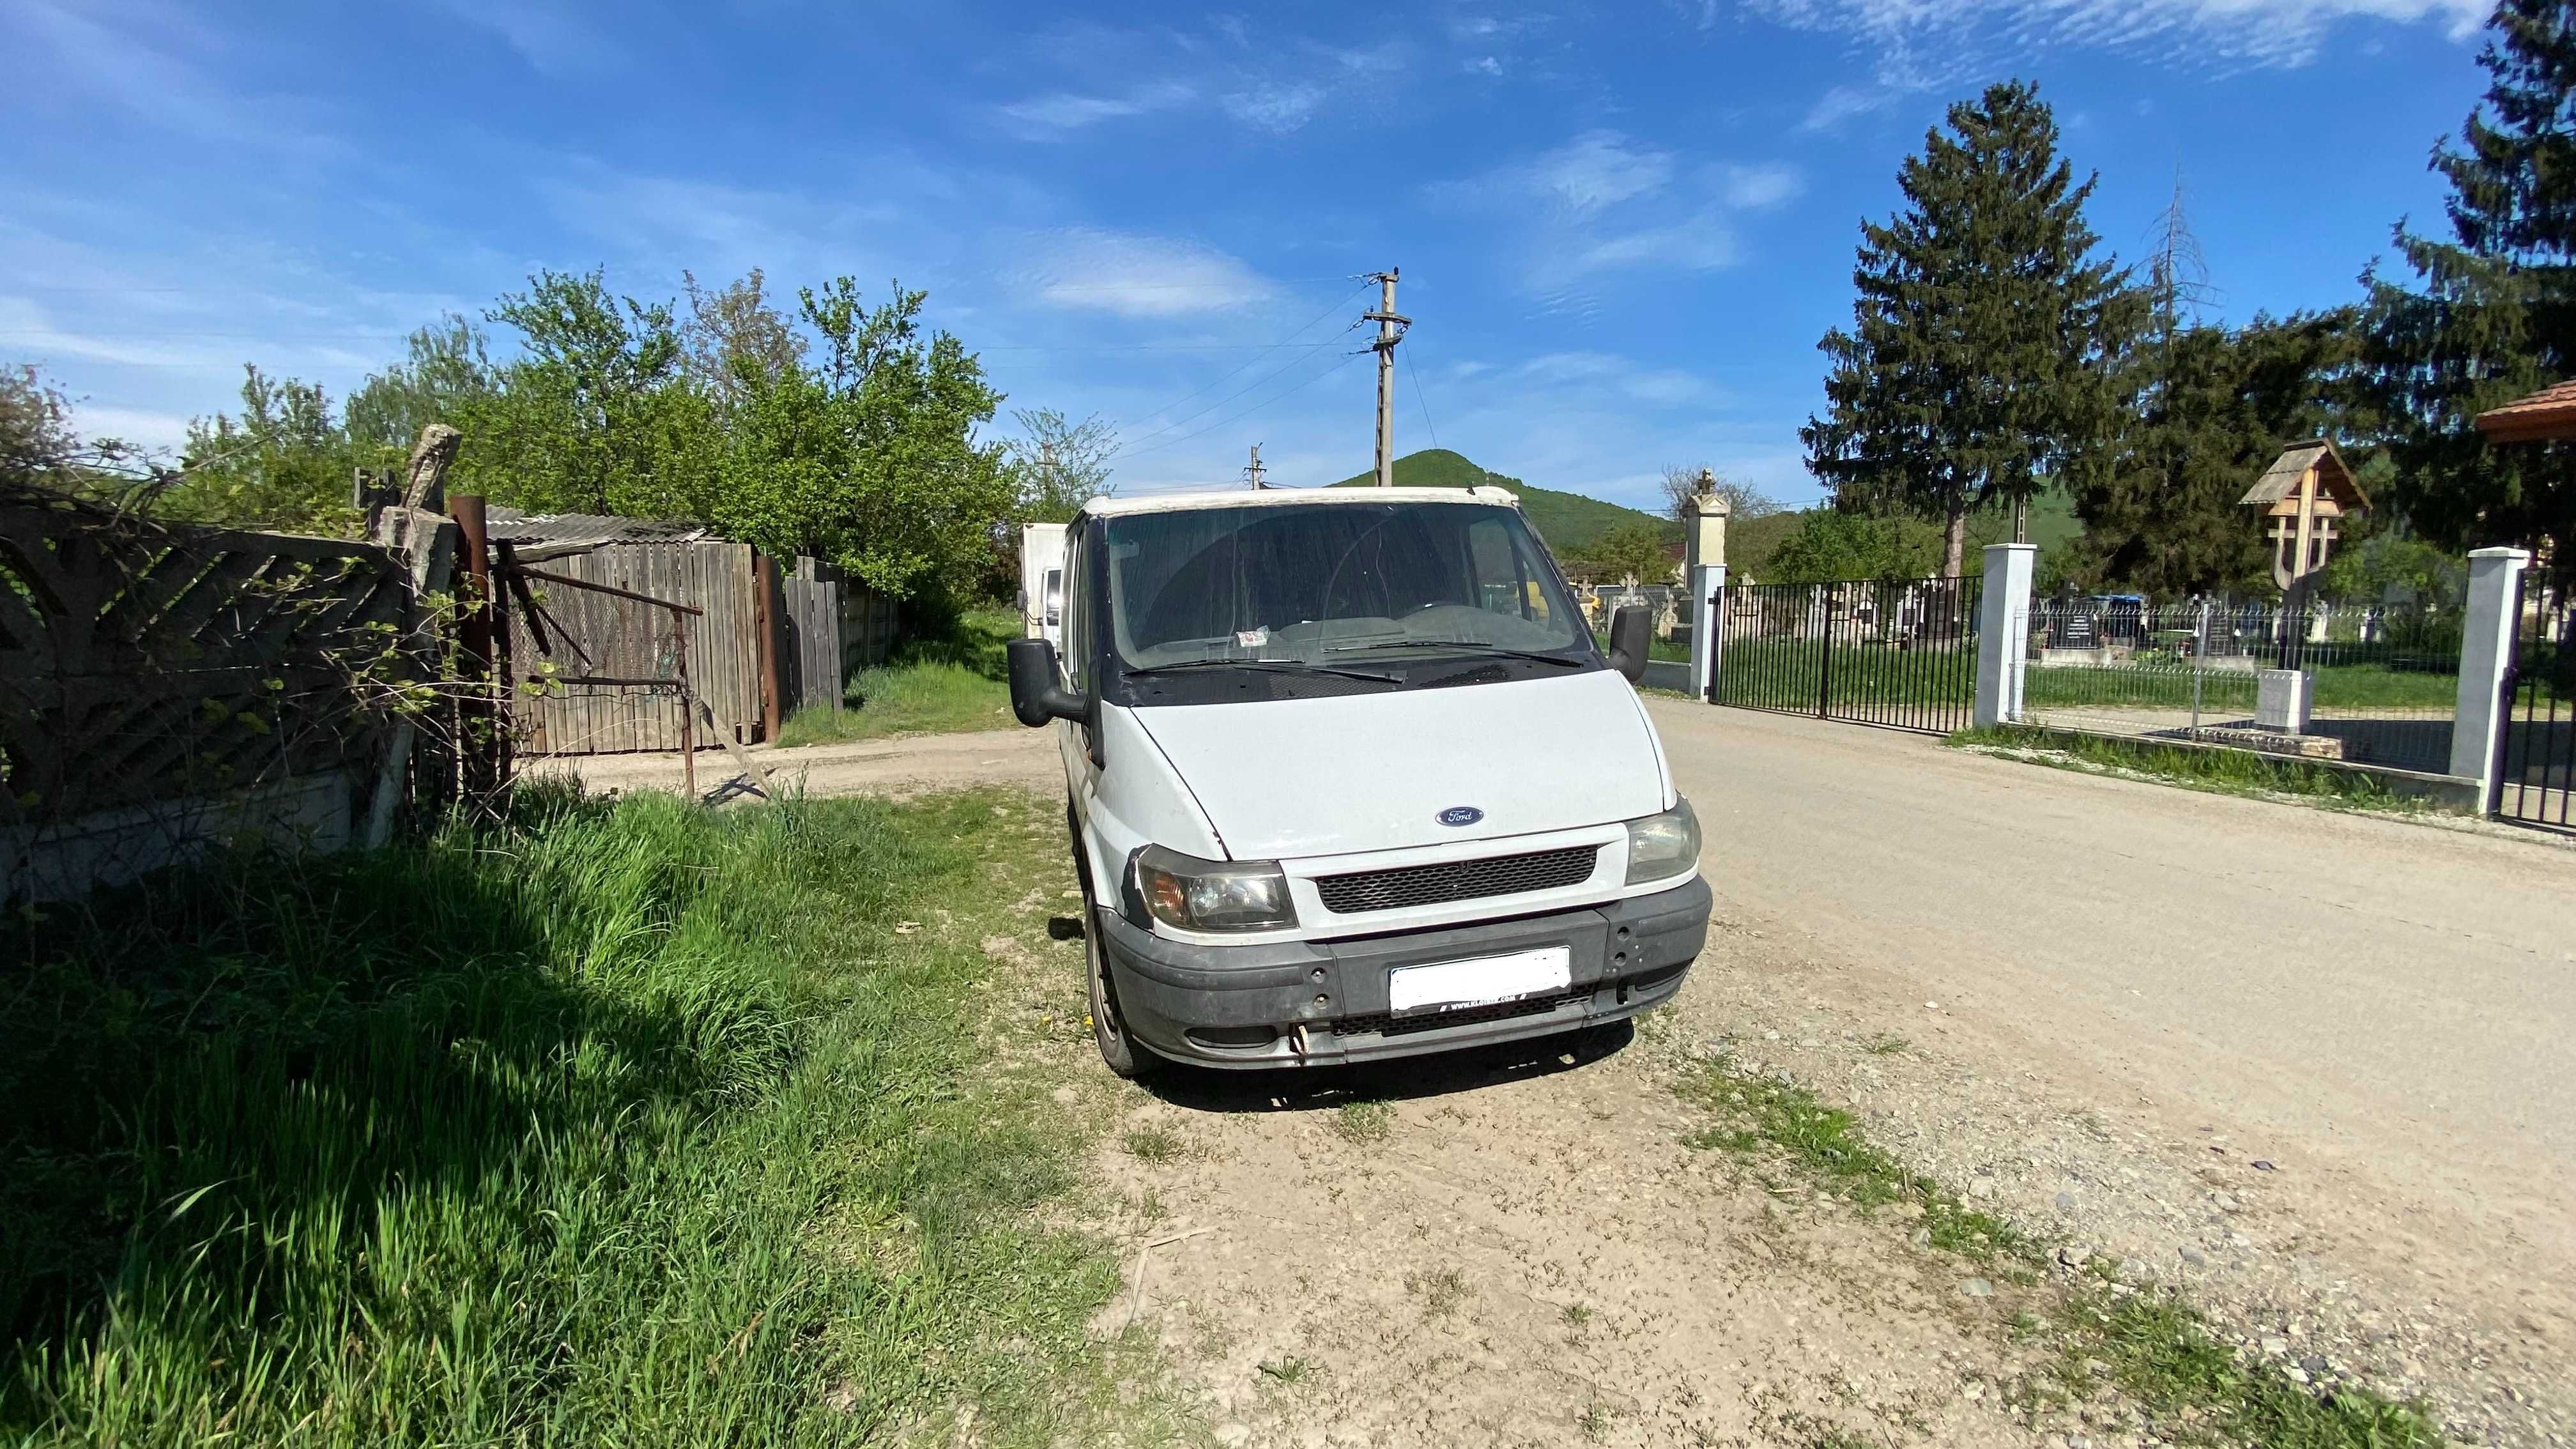 Ax came Ford Transit/ Mondeo 2.0 diesel